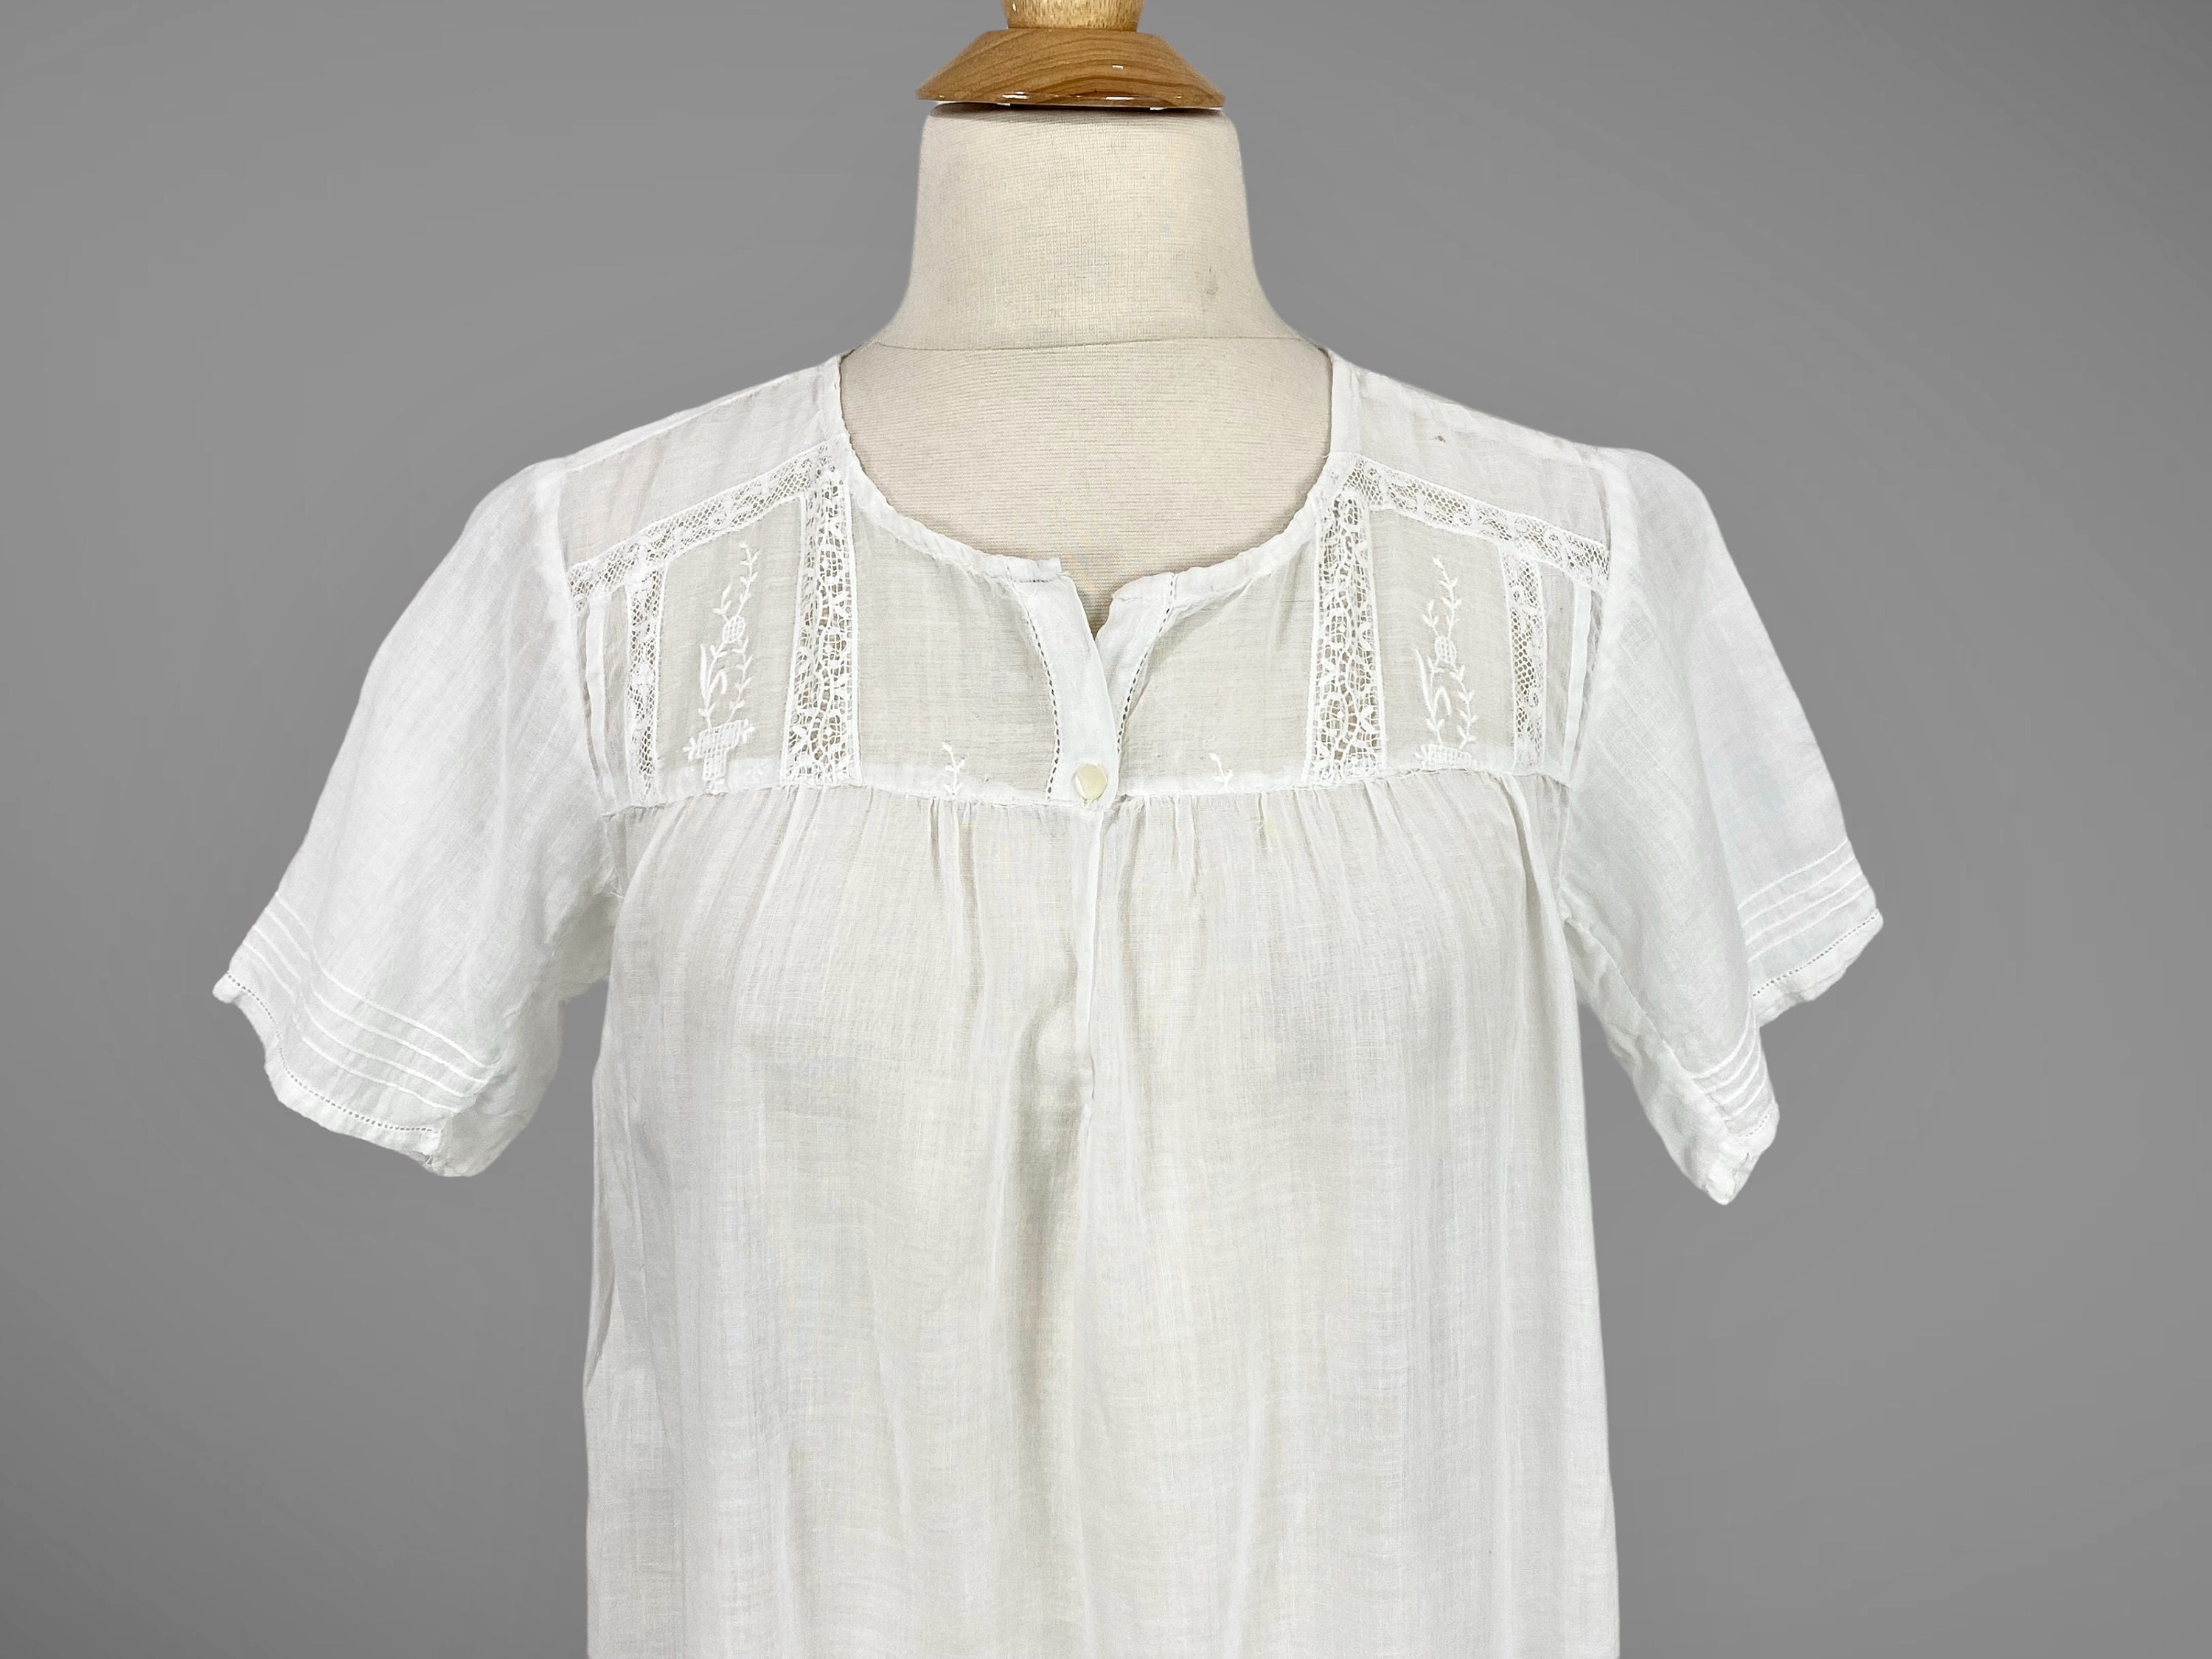 Antique White Nightgown, 1910s Sheer White Cotton Night Dress with ...